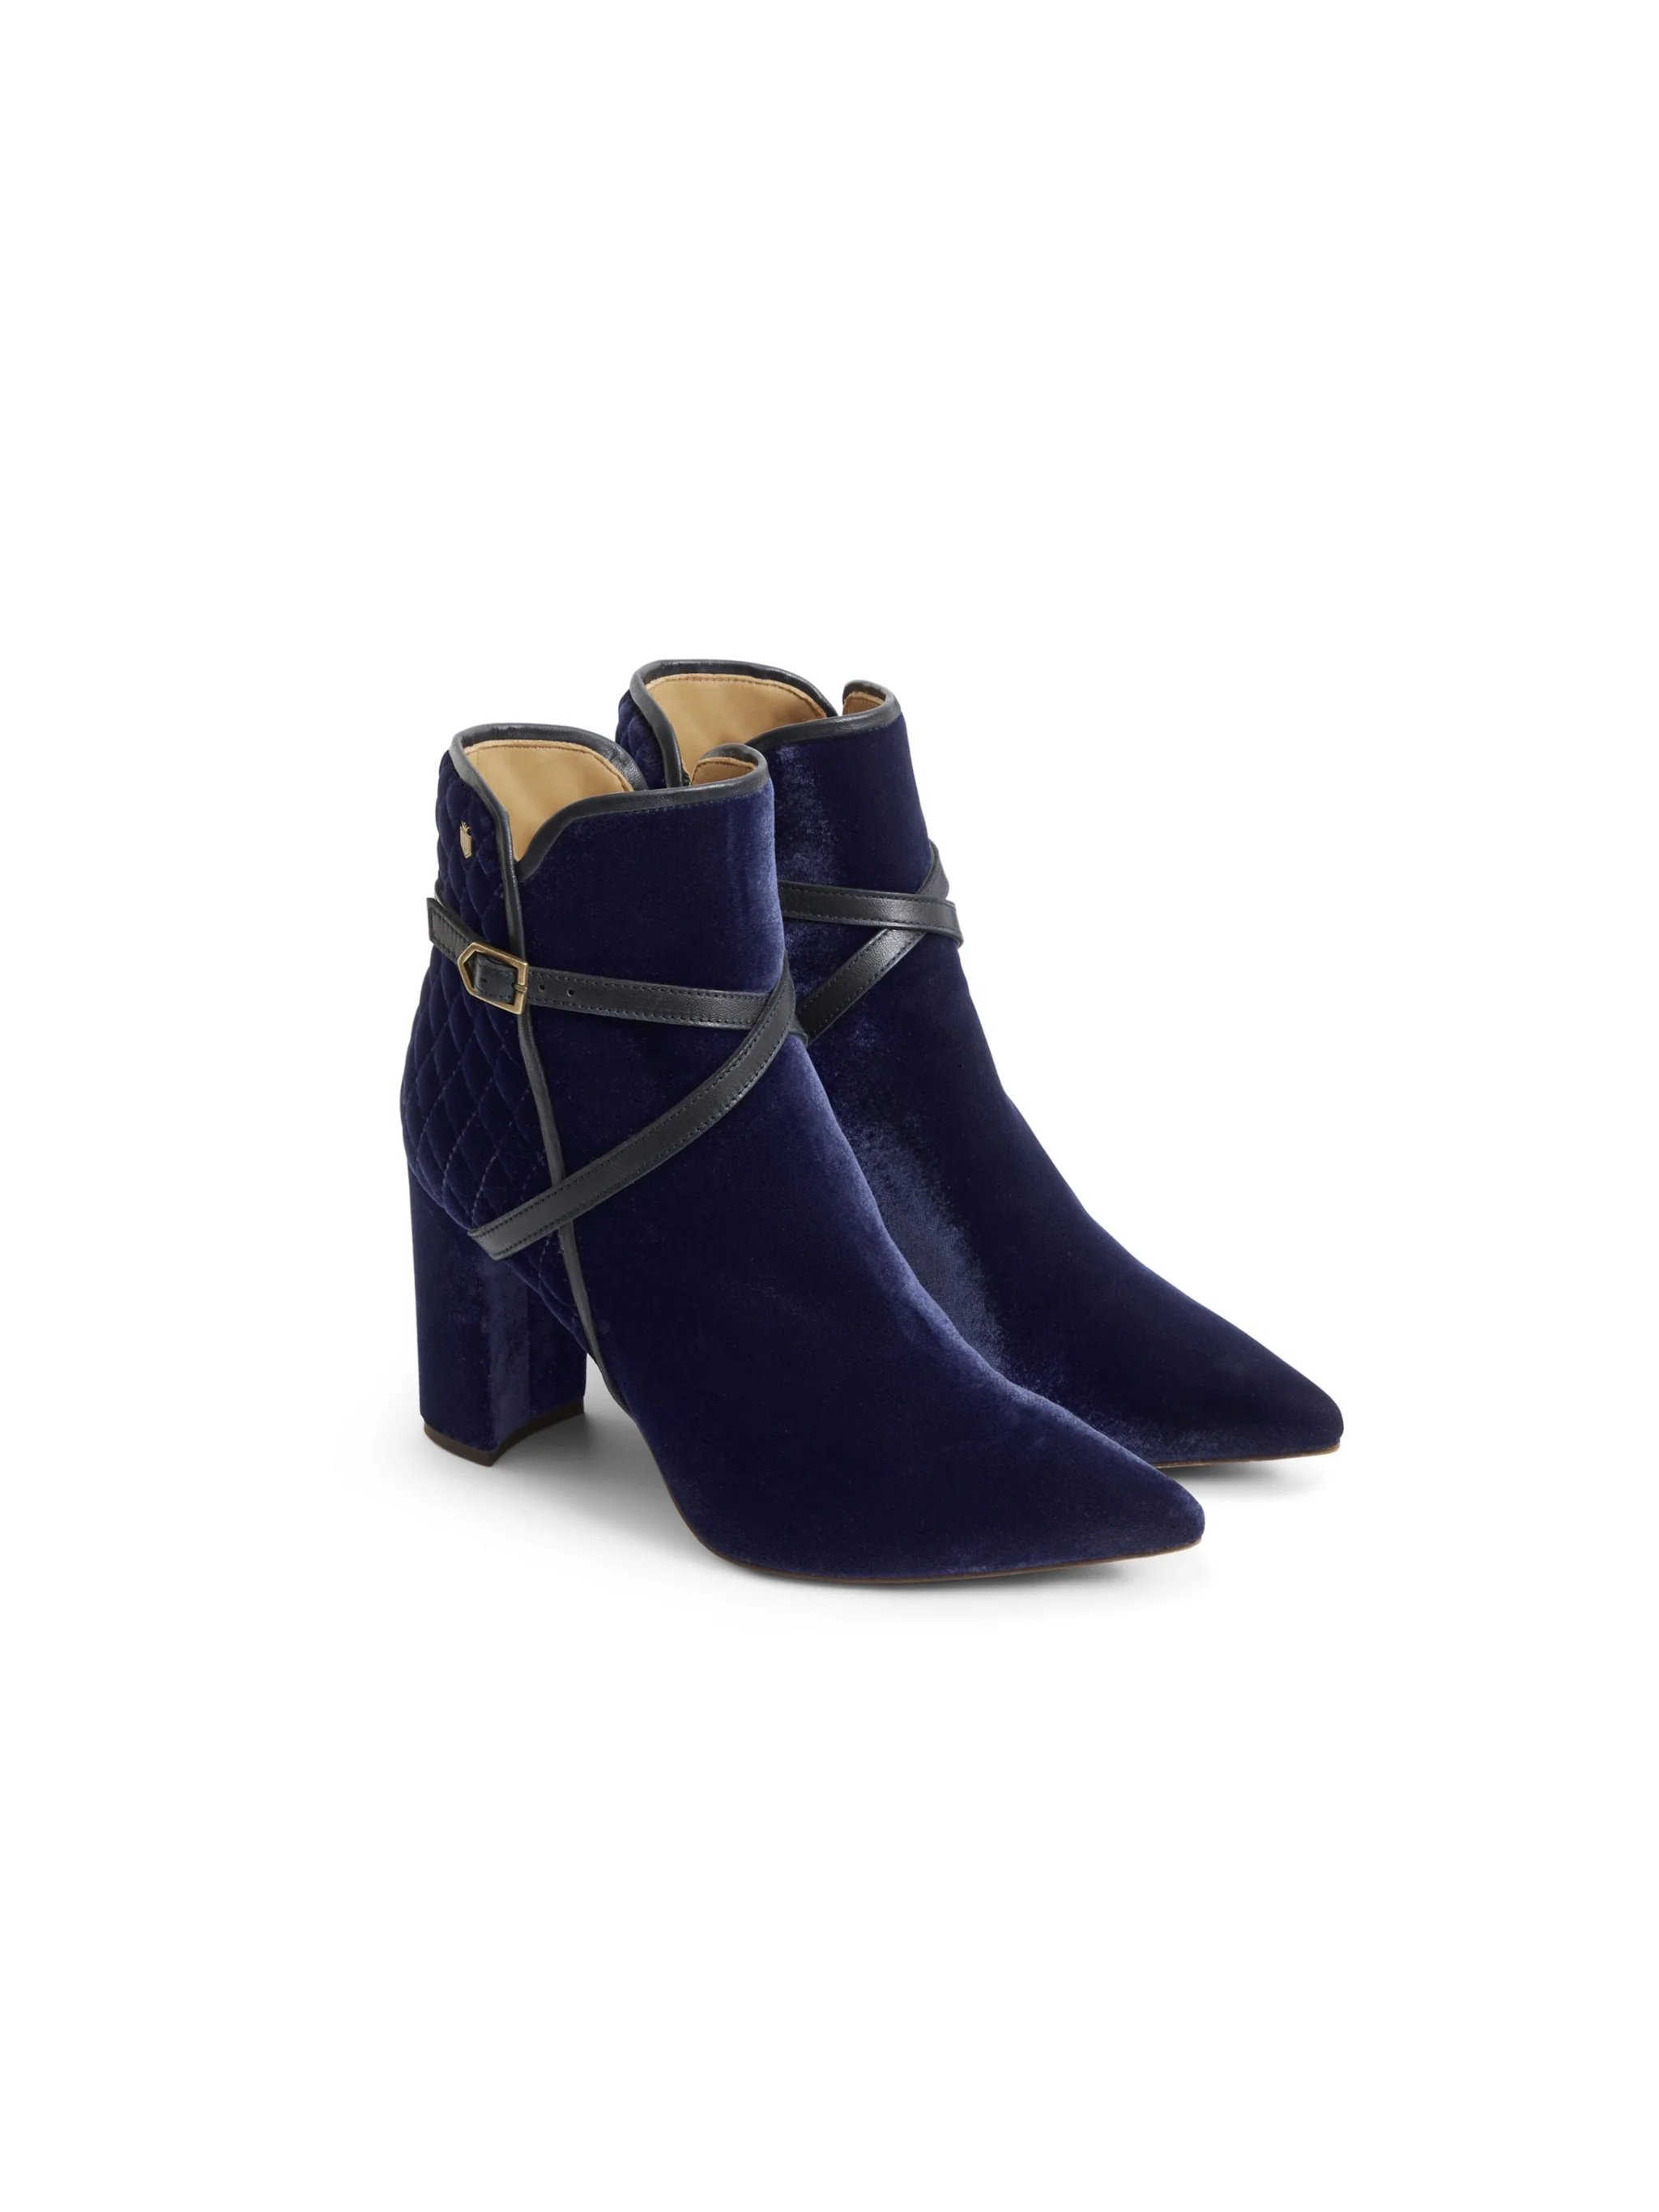 Fairfax & Favor The Chiswick Ankle Boots in Quilted Navy.jpg